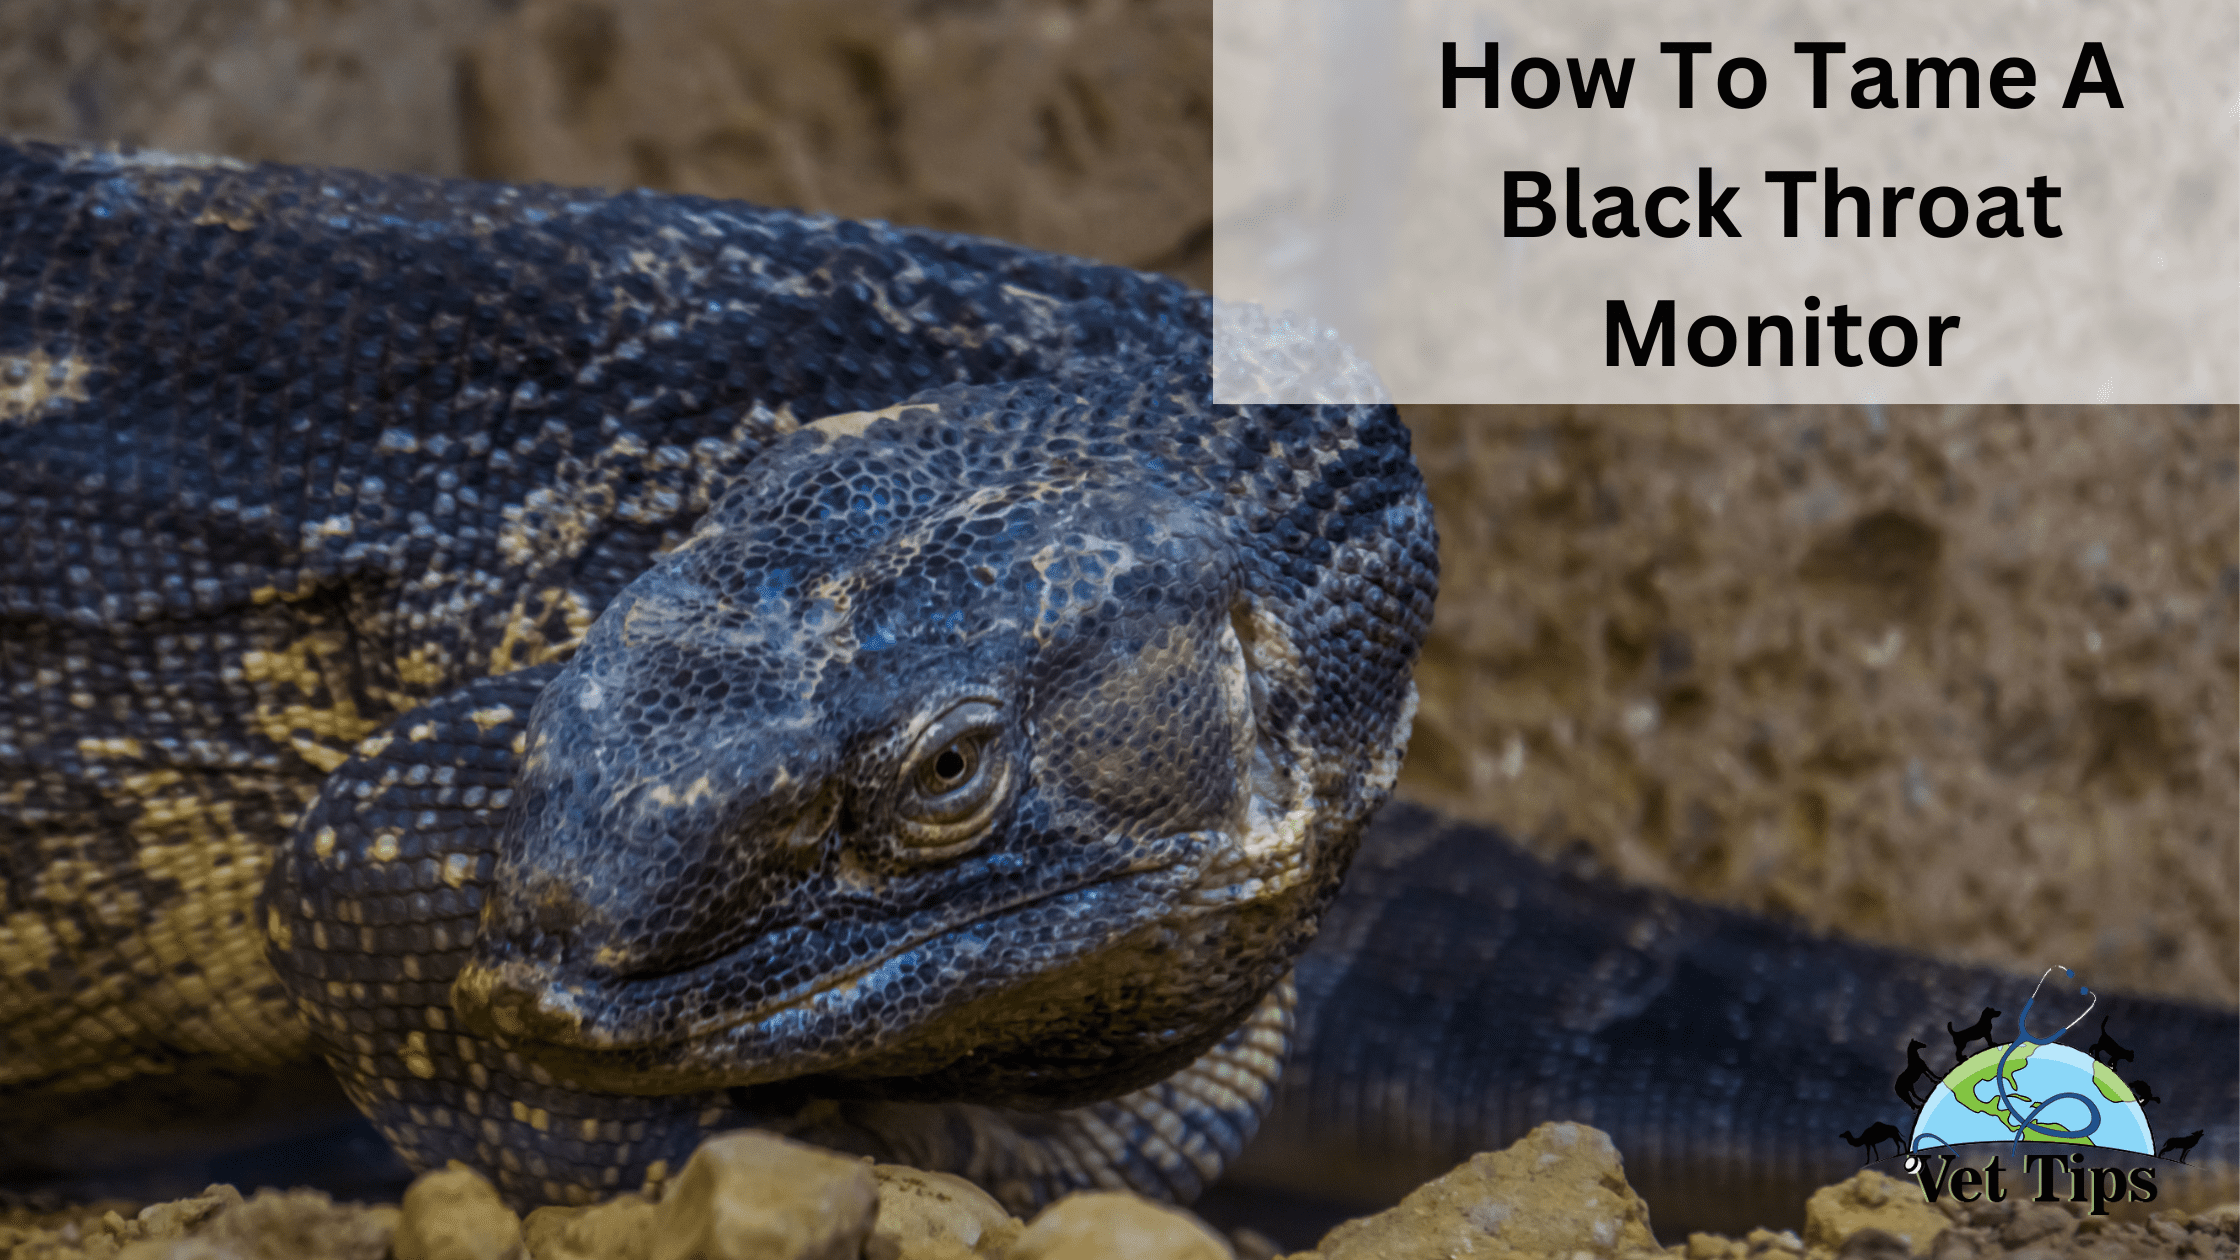 How To Tame A Black Throat Monitor